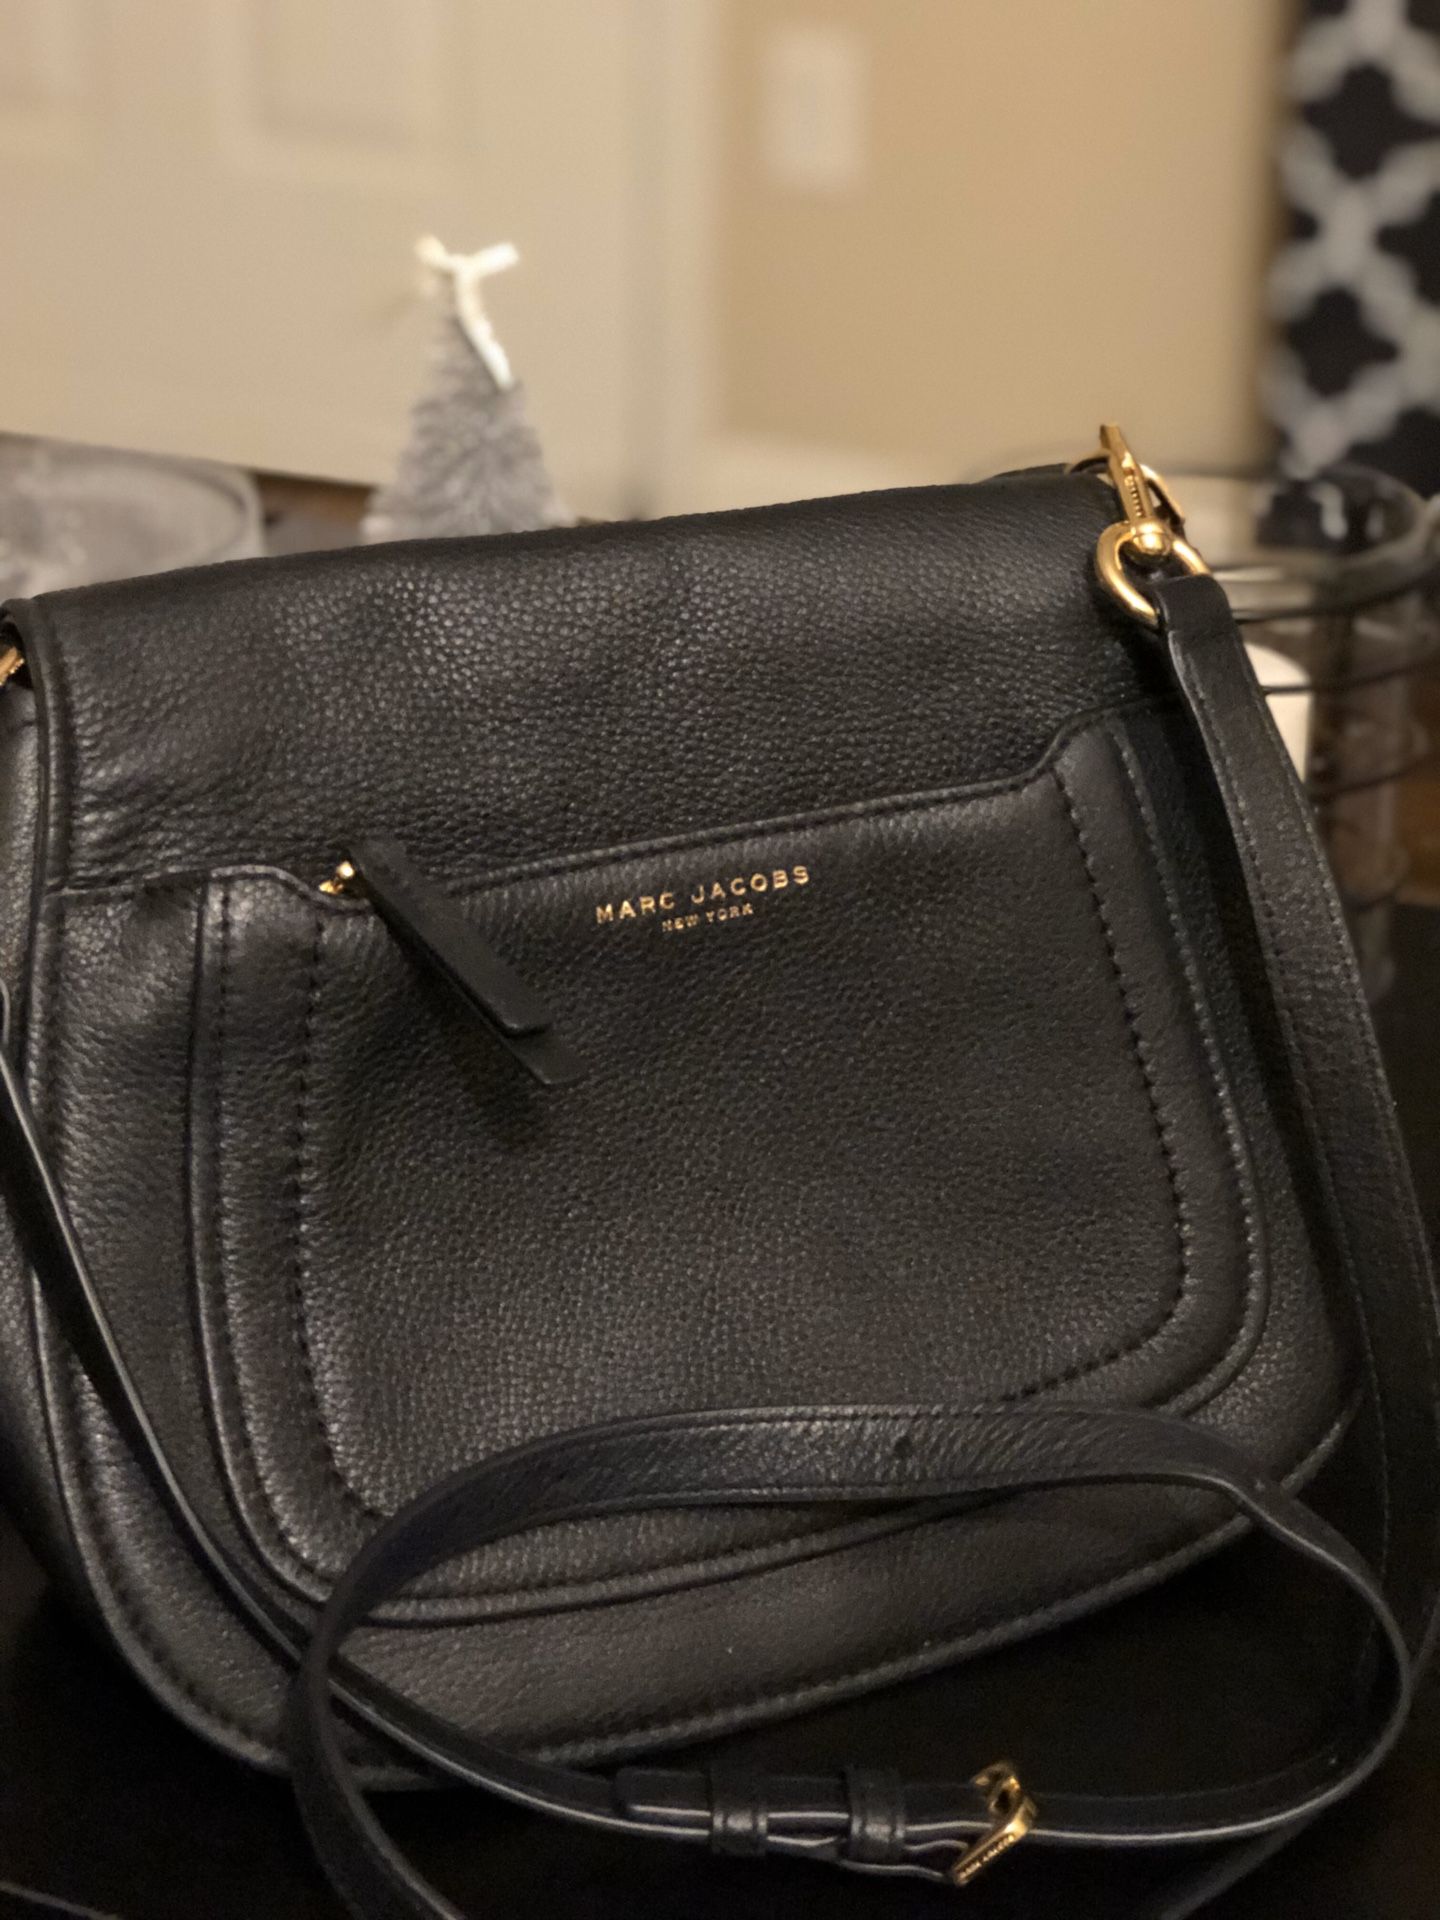 Authentic BRAND NEW hand Bag crossbody , BLACK LEATHER MARC JACOBS,